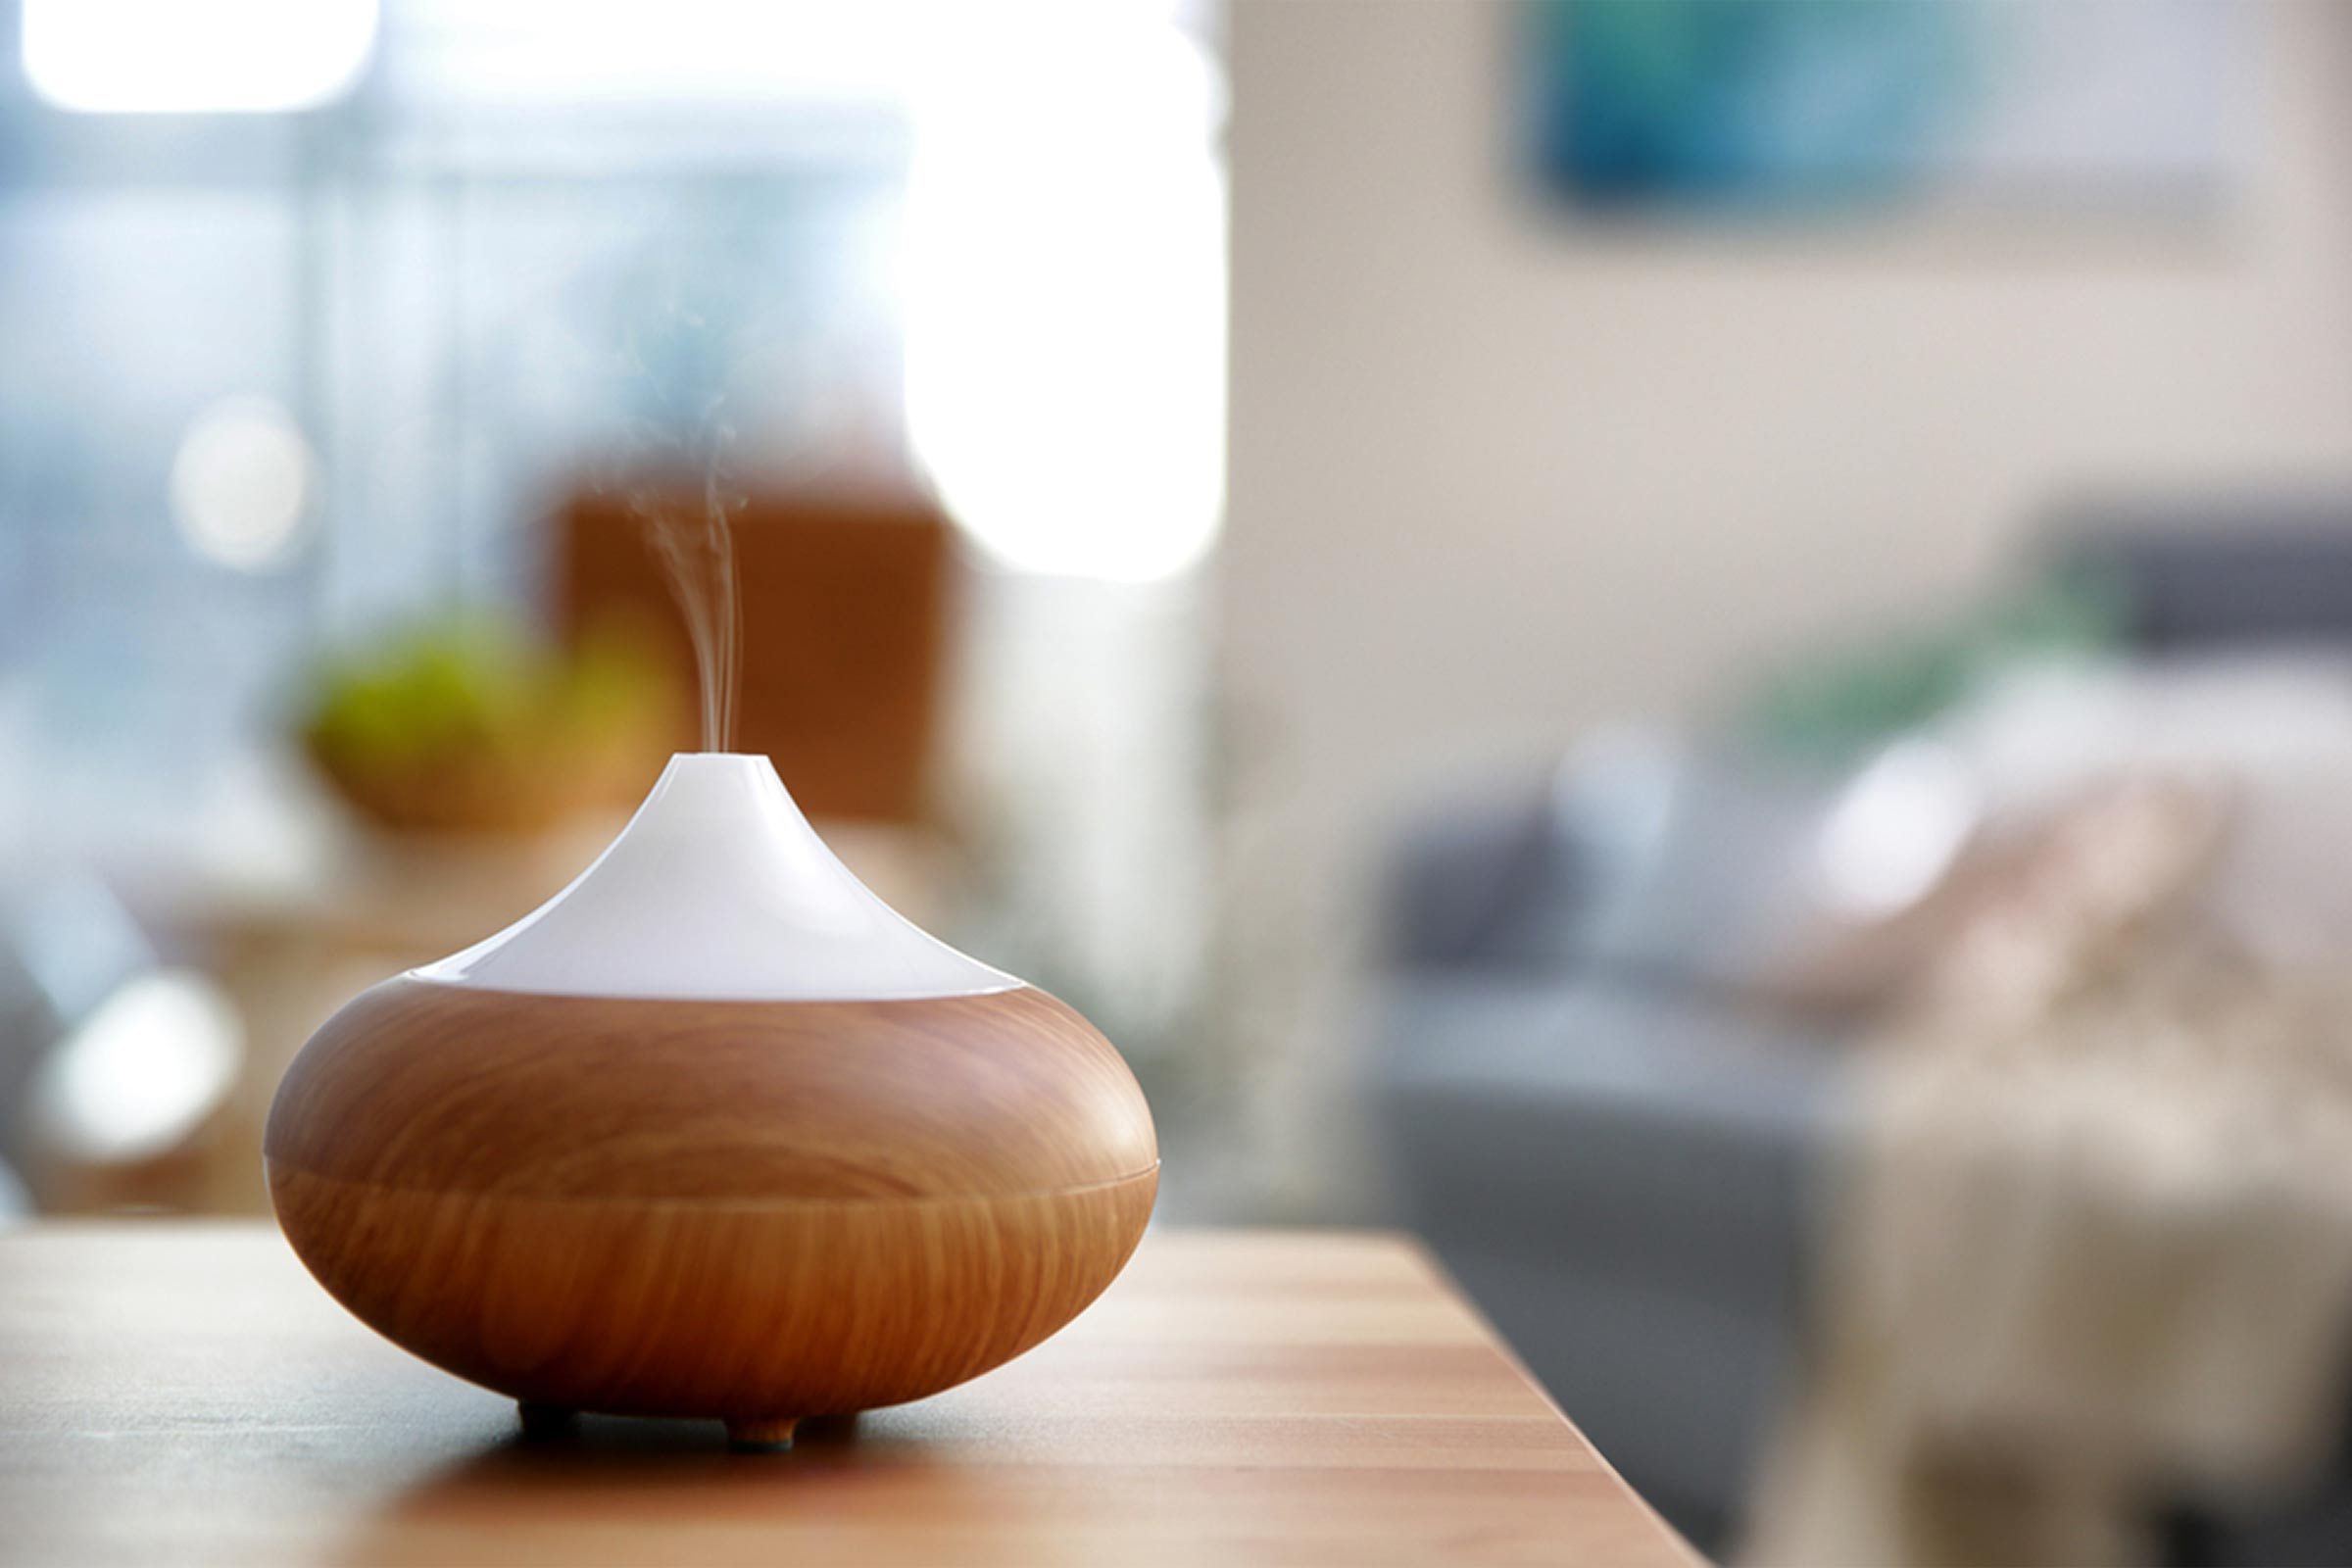 Essential Oil Diffuser For Living Room